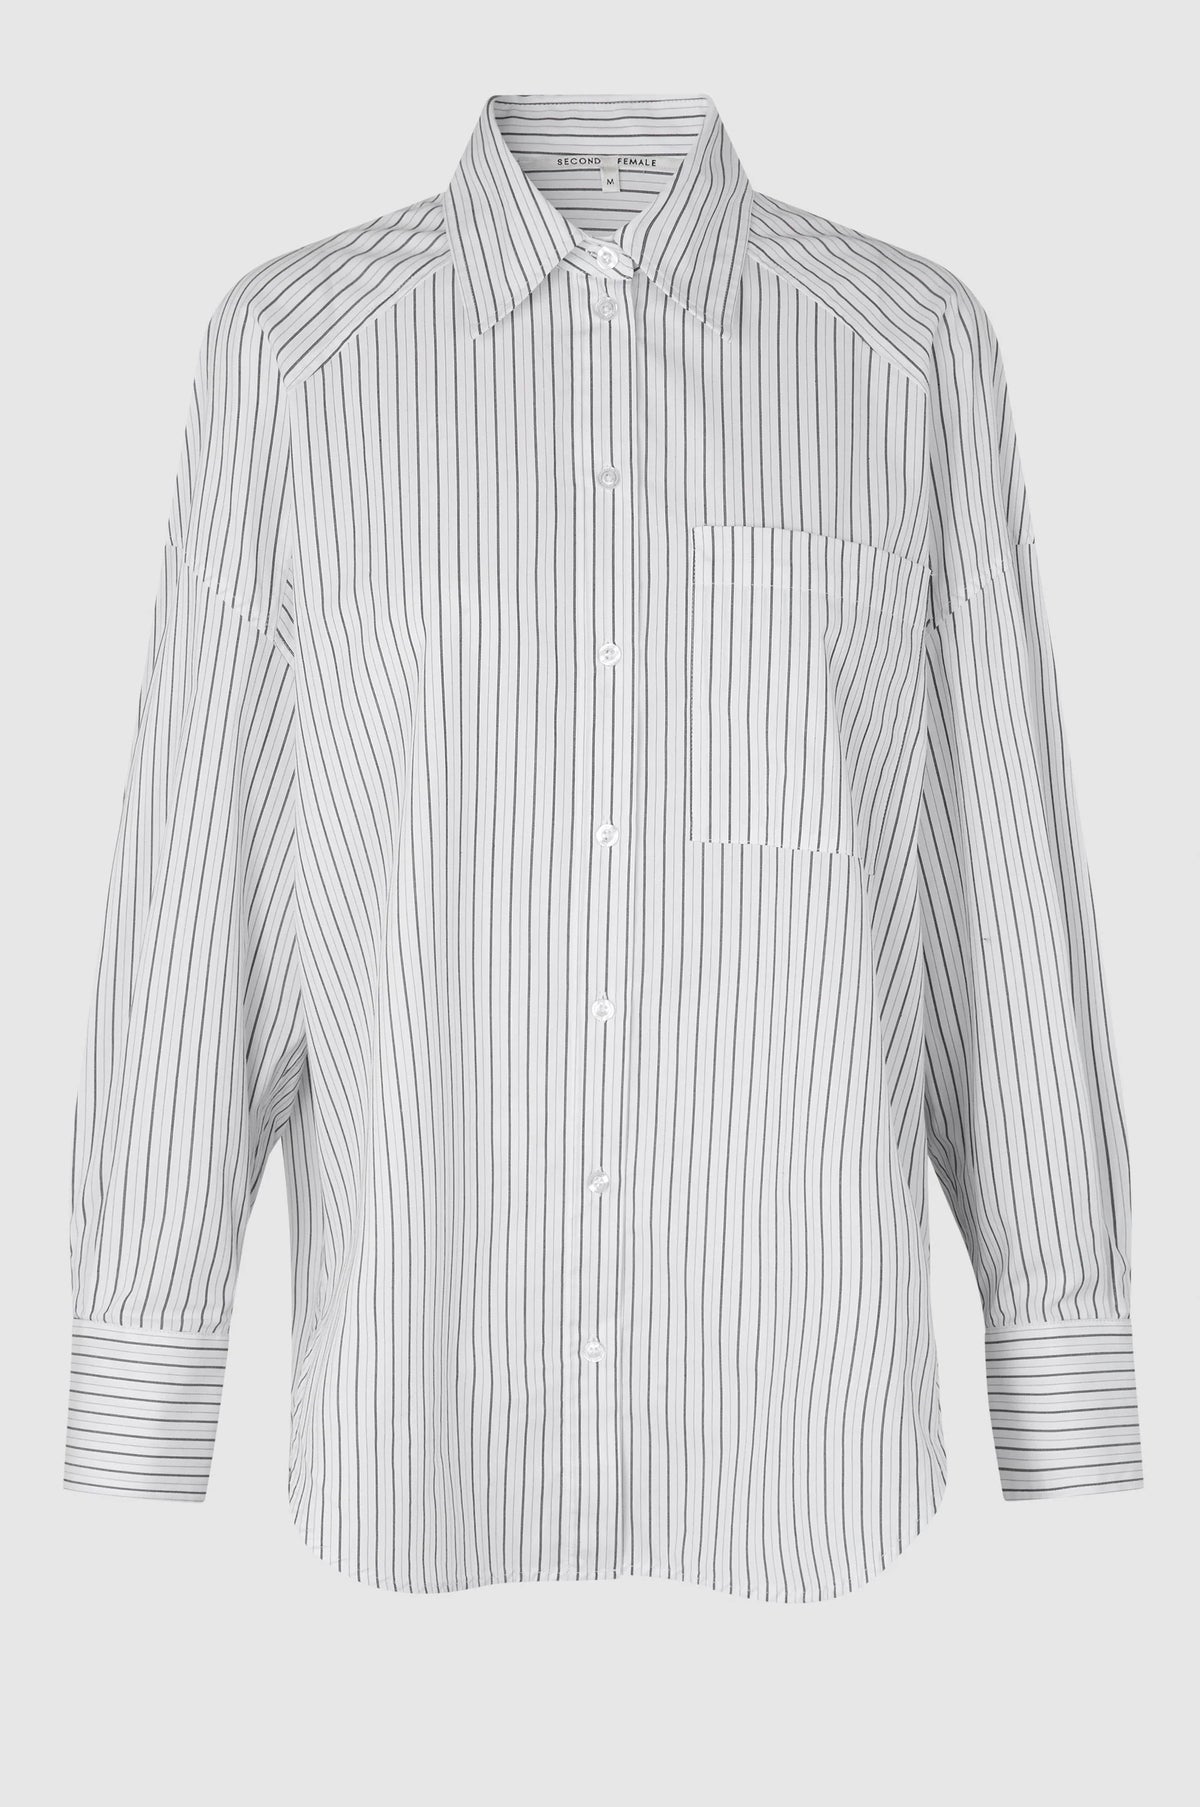 Oversized long sleeved striped shirt with classic collar patch pocket and curved hem